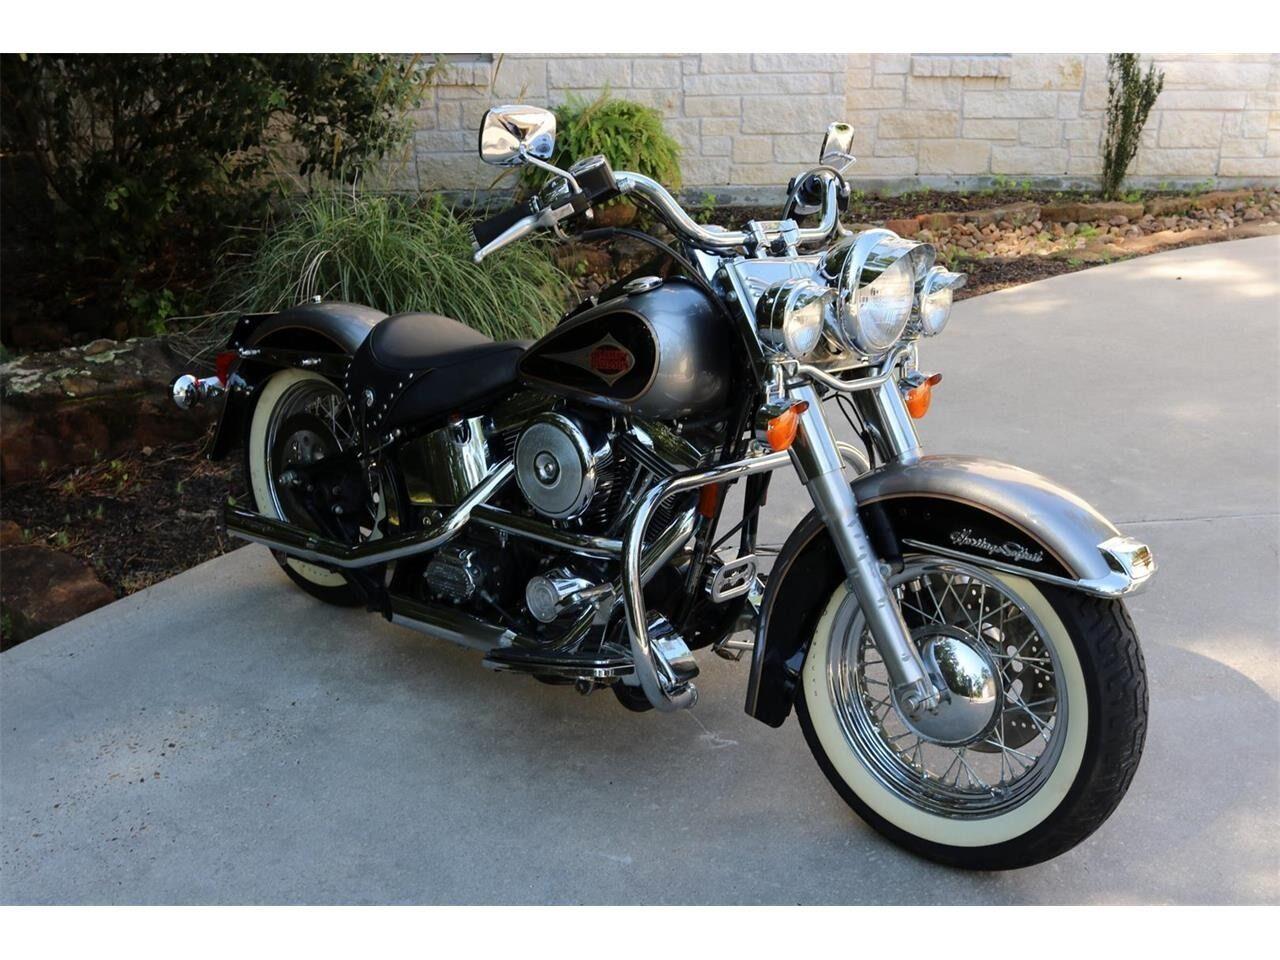 1997 Harley Davidson Softail Classic For Sale 38 Used Motorcycles From 4 000